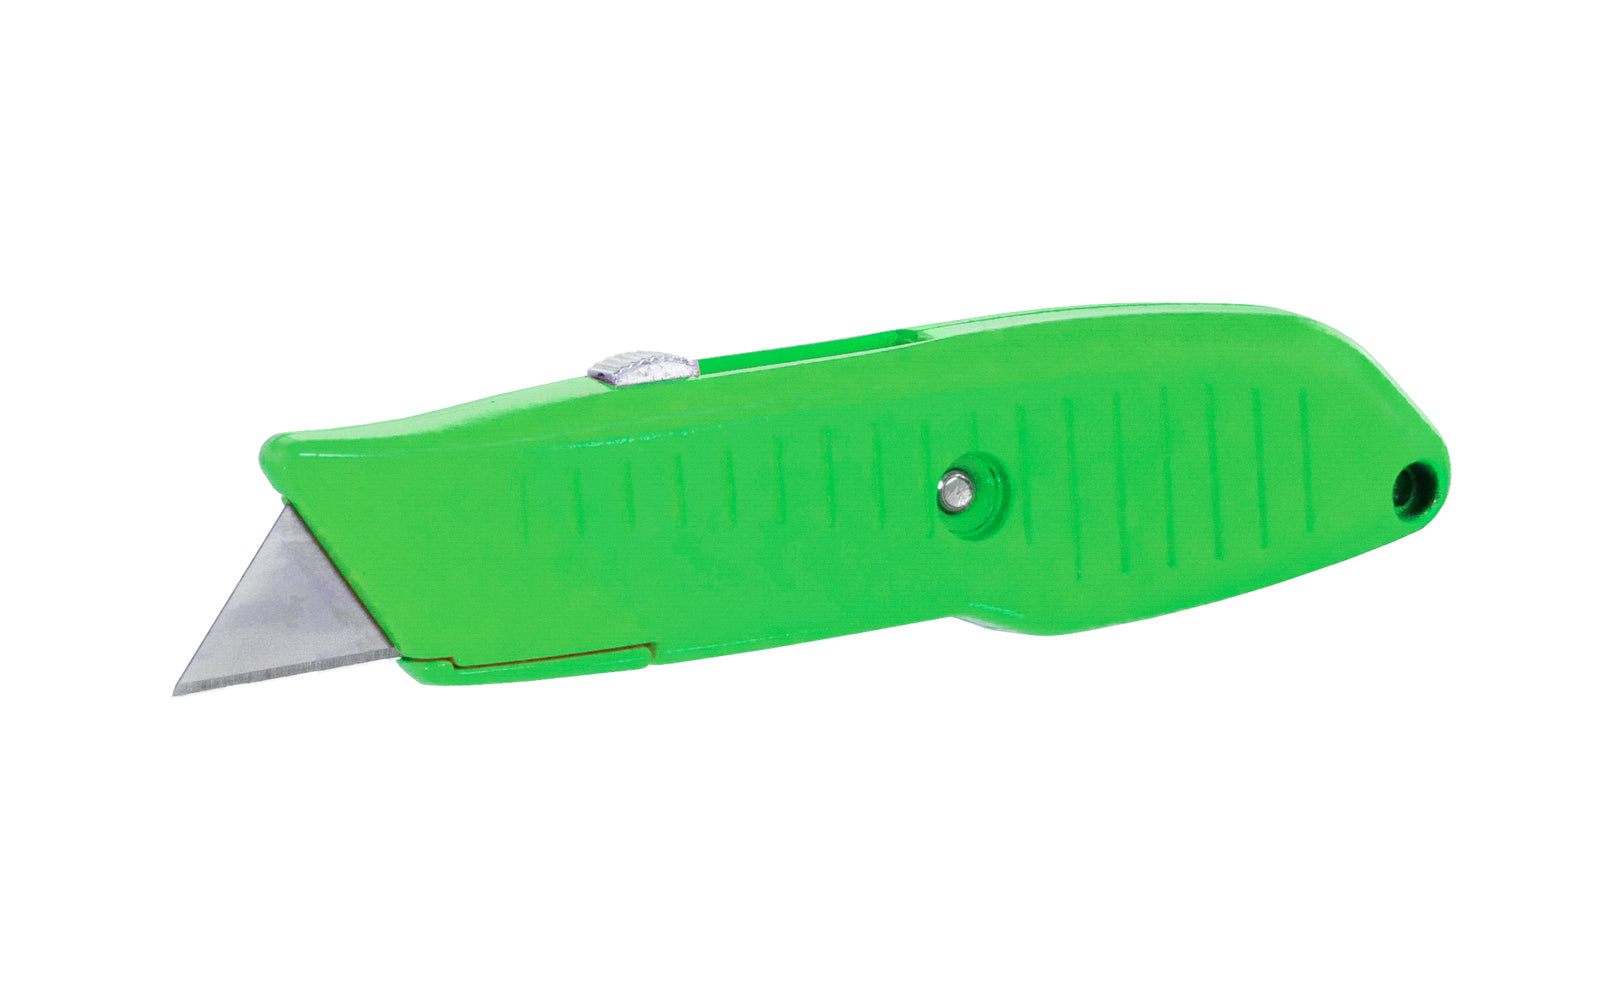 Lutz #82 Retractable Utility Knife in a green color. Die cast body from zinc for strength & durability. Etched ribs for a good grip. Metal utility knife with built zinc retractor for smooth operation in three cutting positions. Blade storage inside knife. Takes heavy duty utility knife blades. 052427382030. Model 82